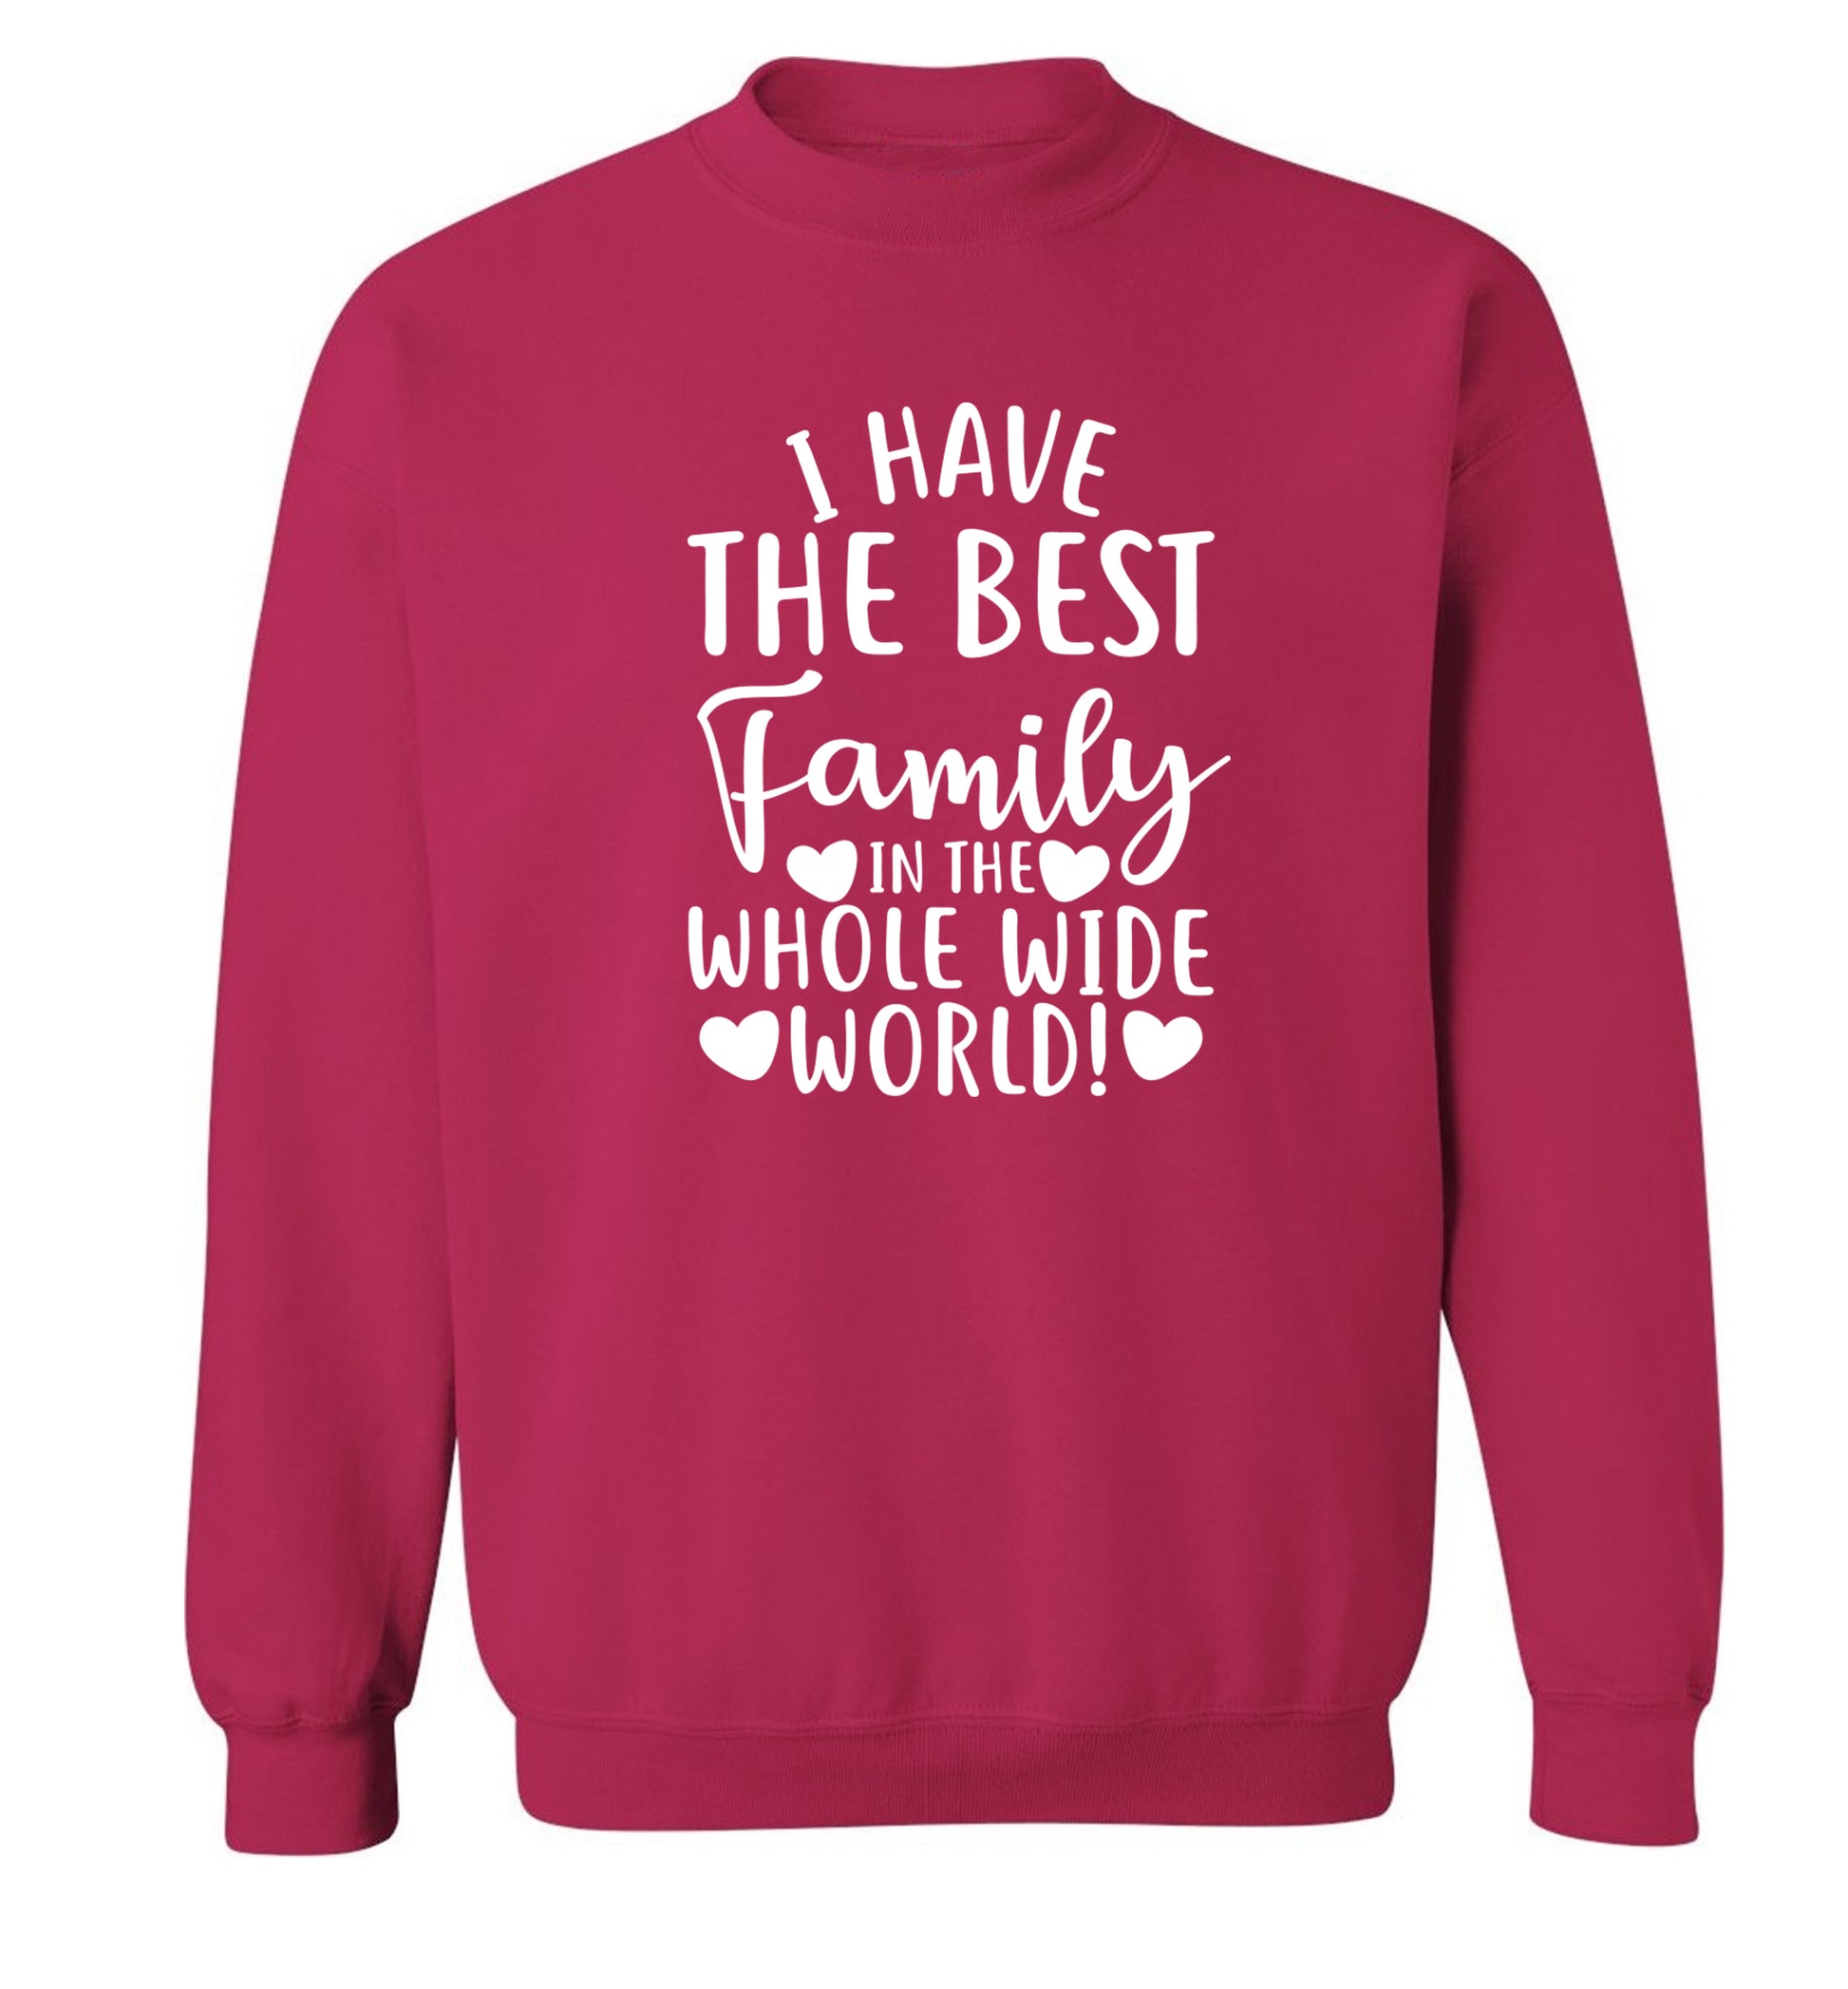 I have the best family in the whole wide world! Adult's unisex pink Sweater 2XL